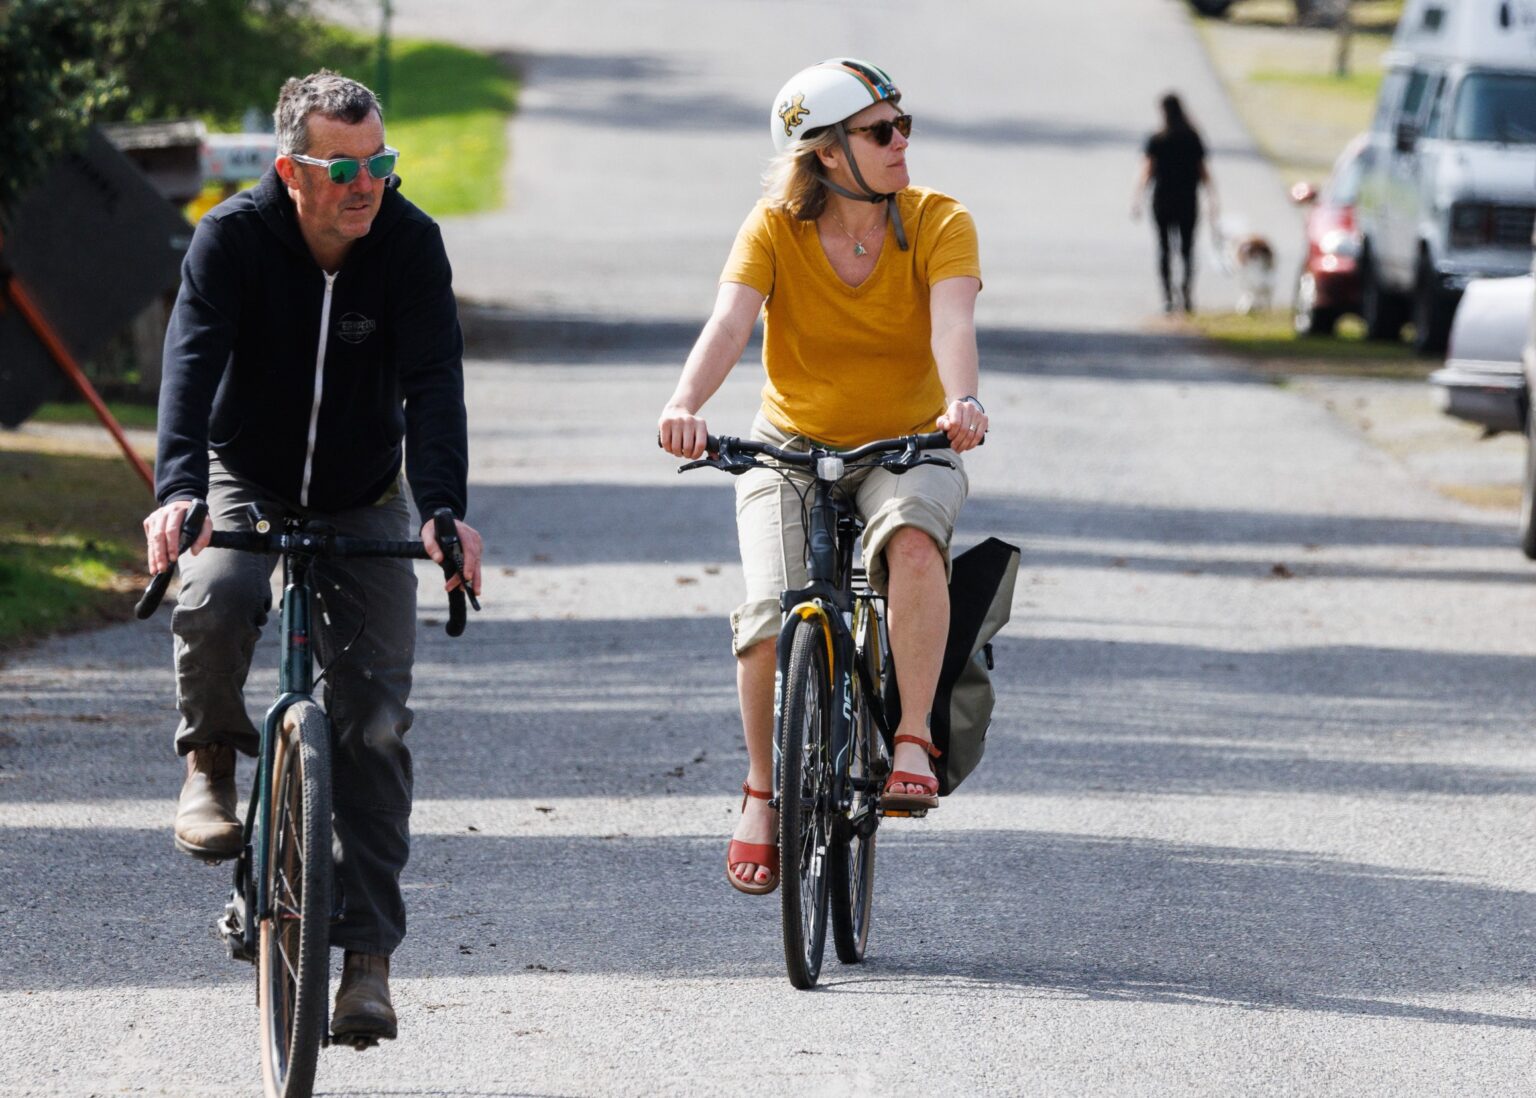 Bikers and walkers enjoy the slow pace of Donovan Avenue in Fairhaven on April 7. Neighbors worry an 80-foot sidewalk to be built at 801 Donovan will disrupt the neighborhood's character.